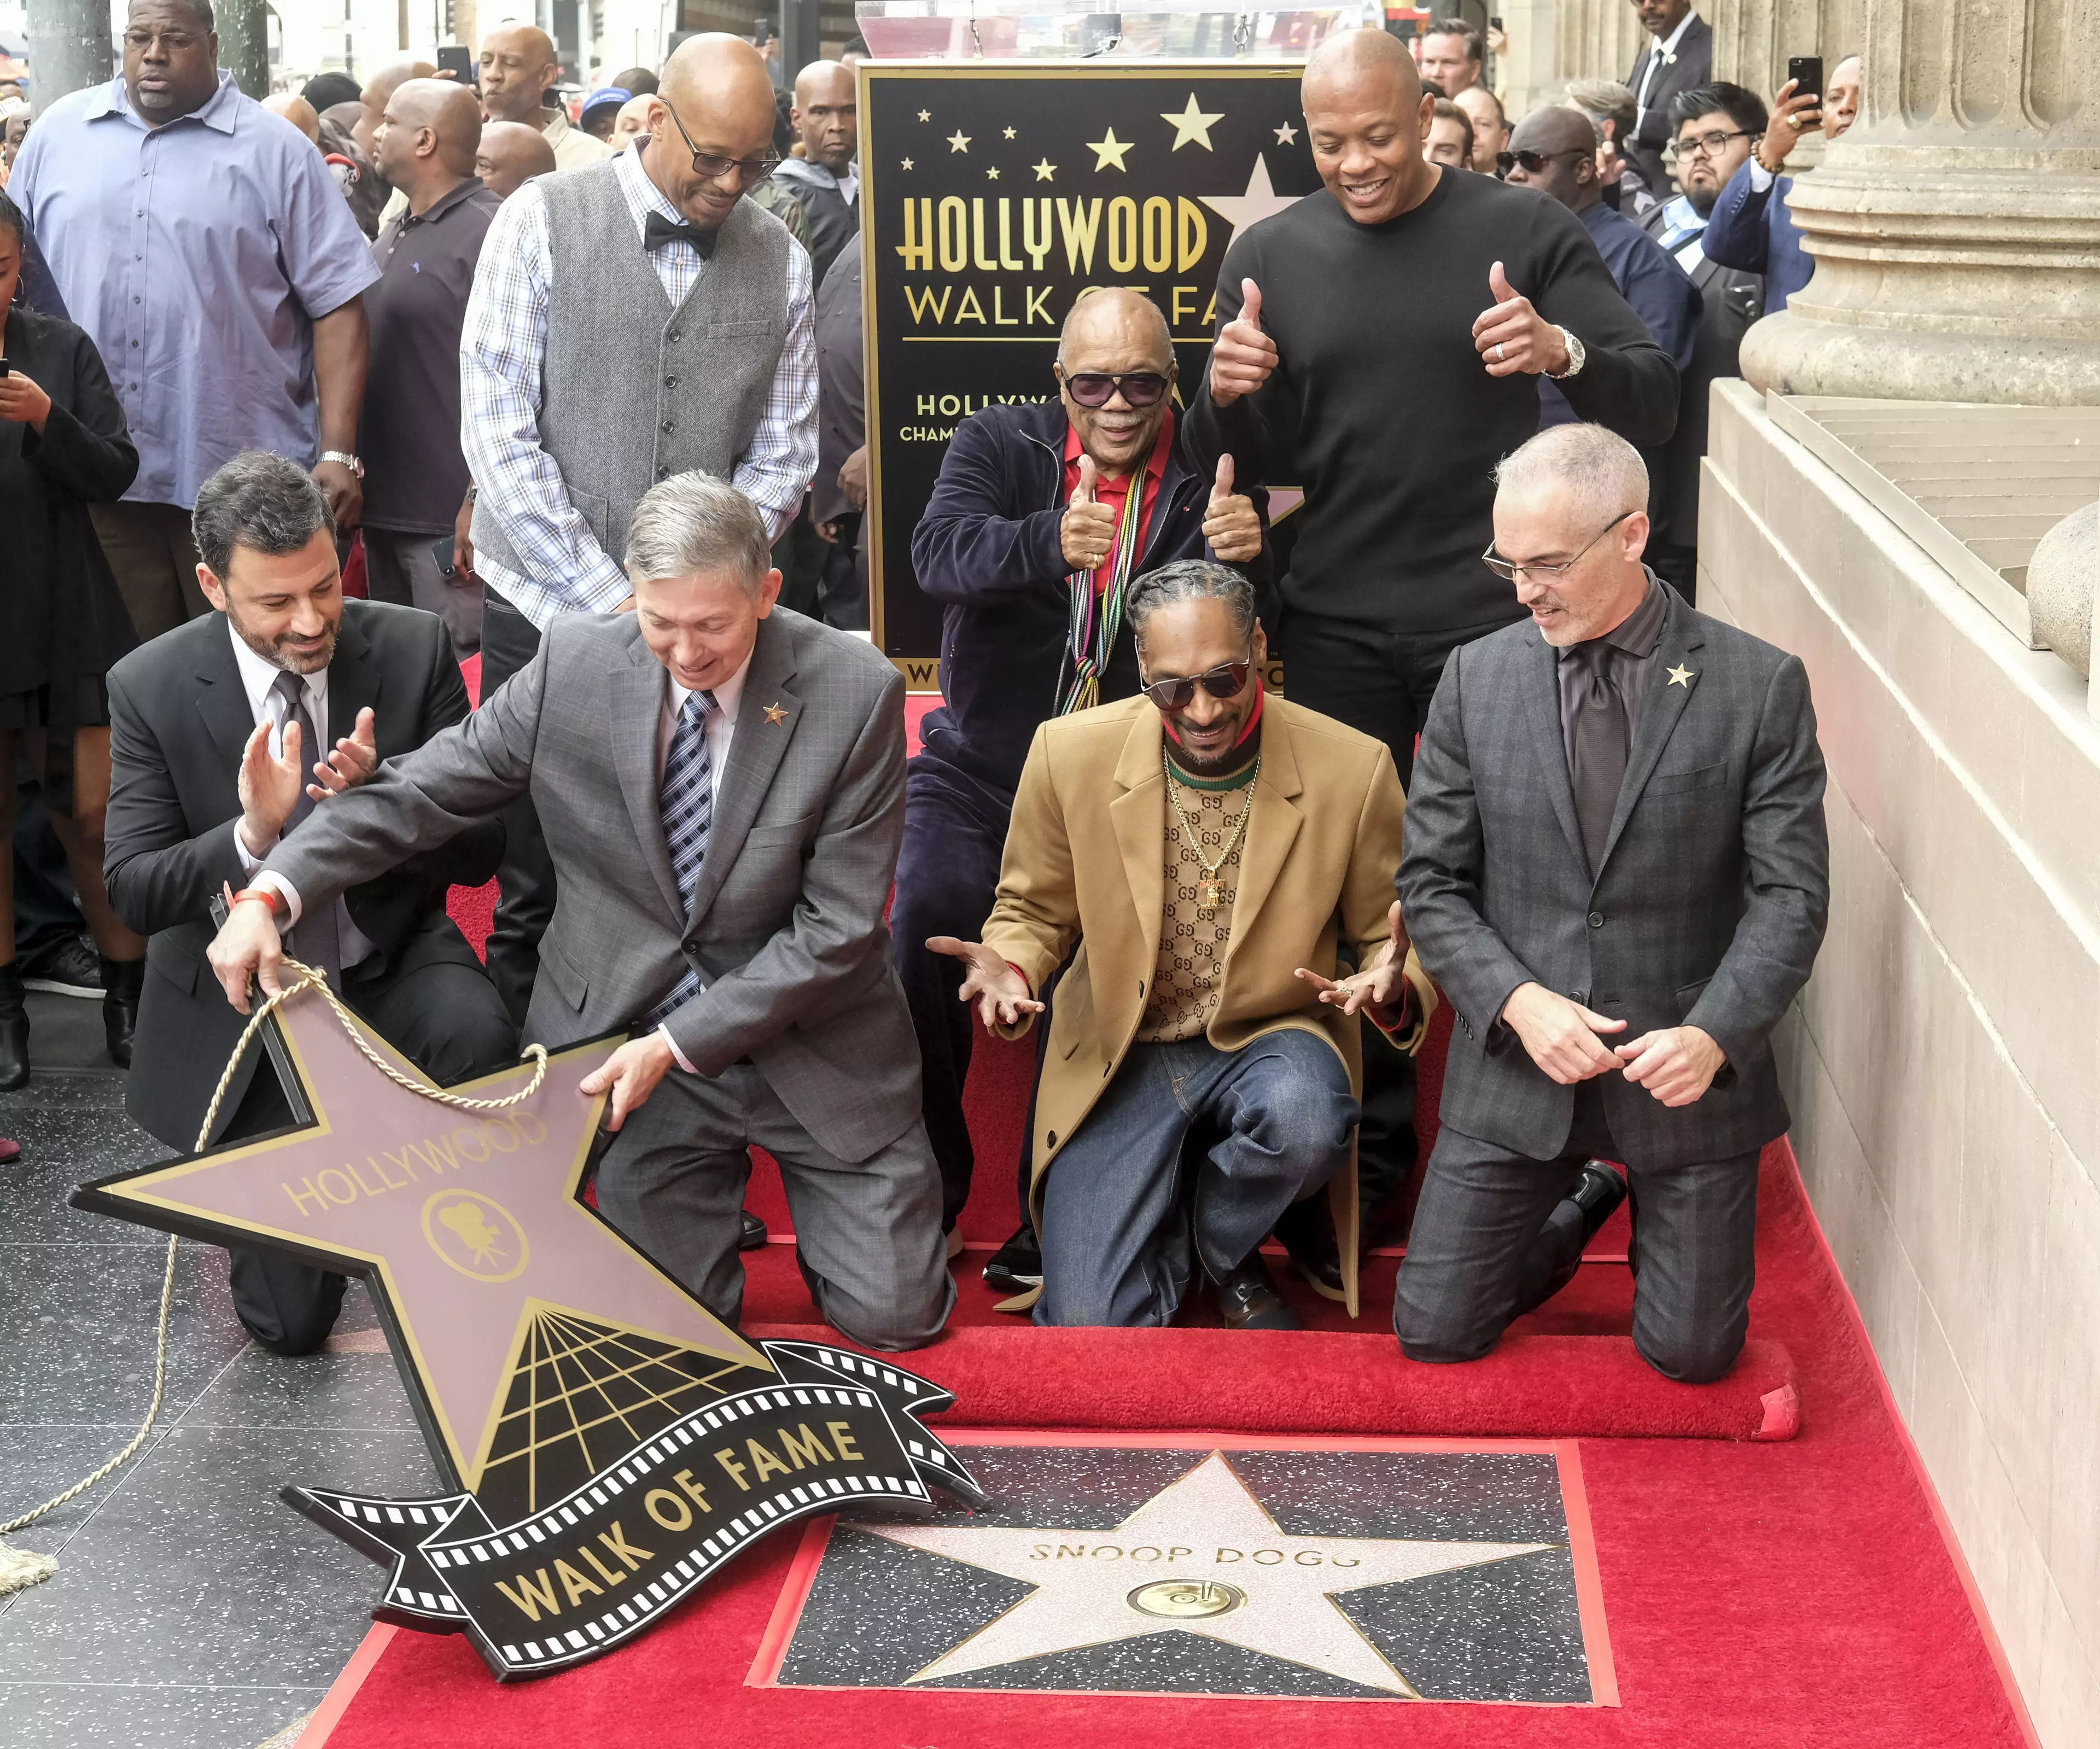 Snoop Dogg unveils the Walk of Fame star.